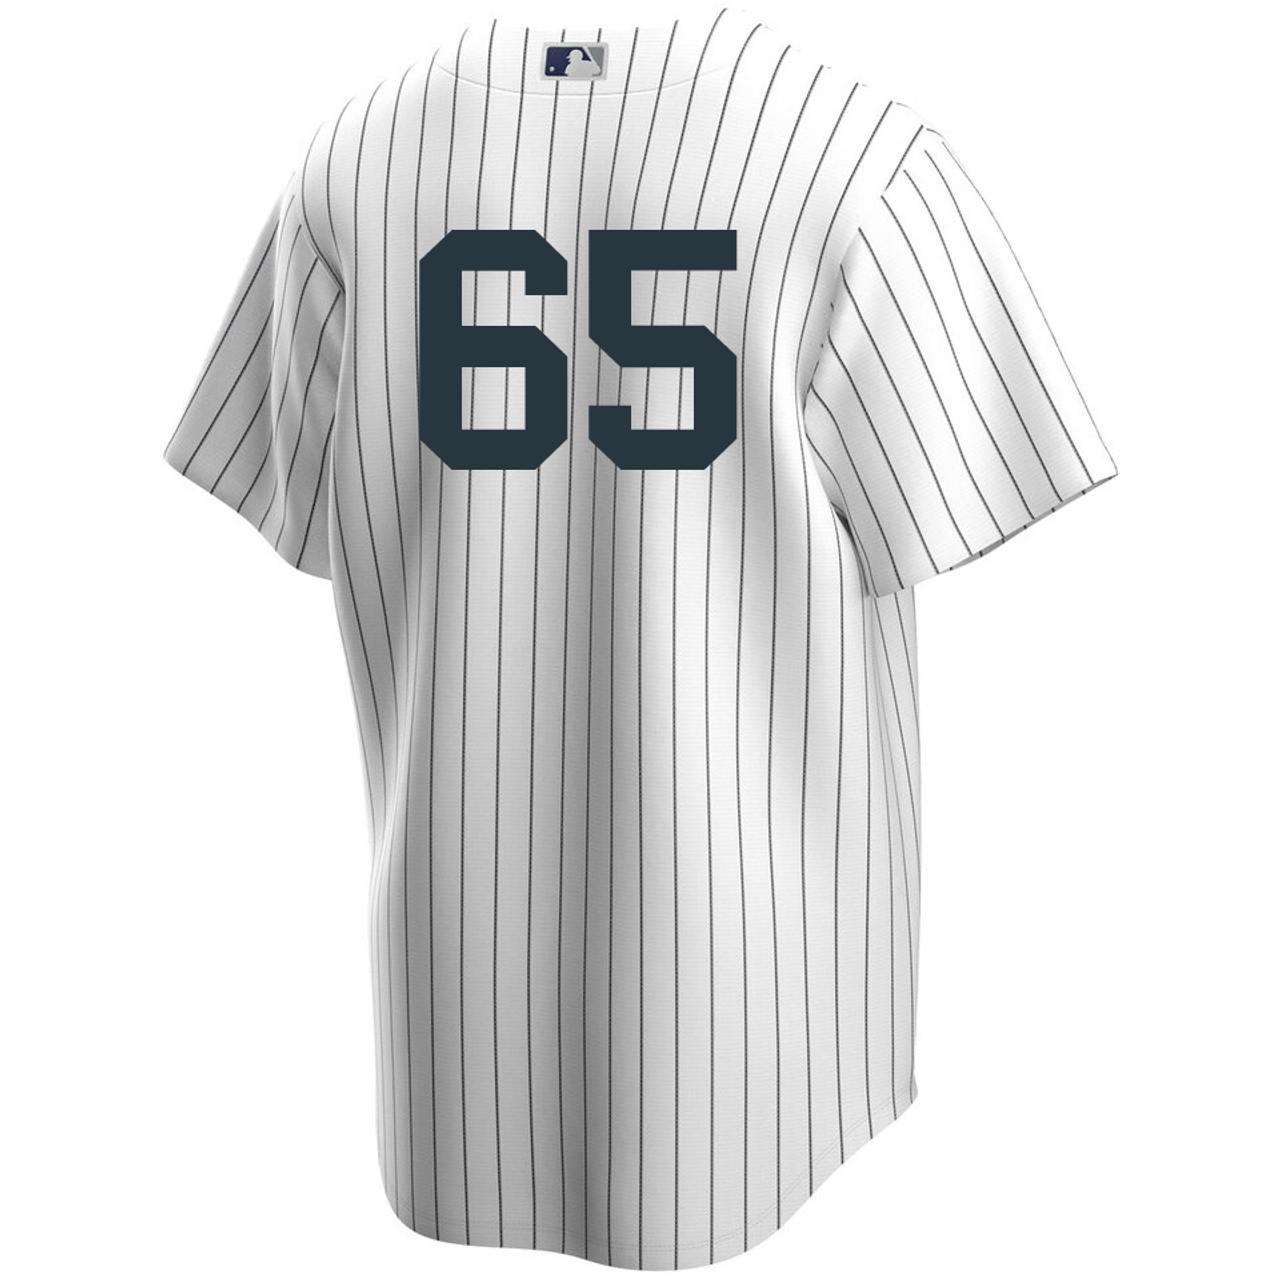 Nestor Cortes No Name Road Jersey - NY Yankees Number Only Replica Adult  Road Jersey